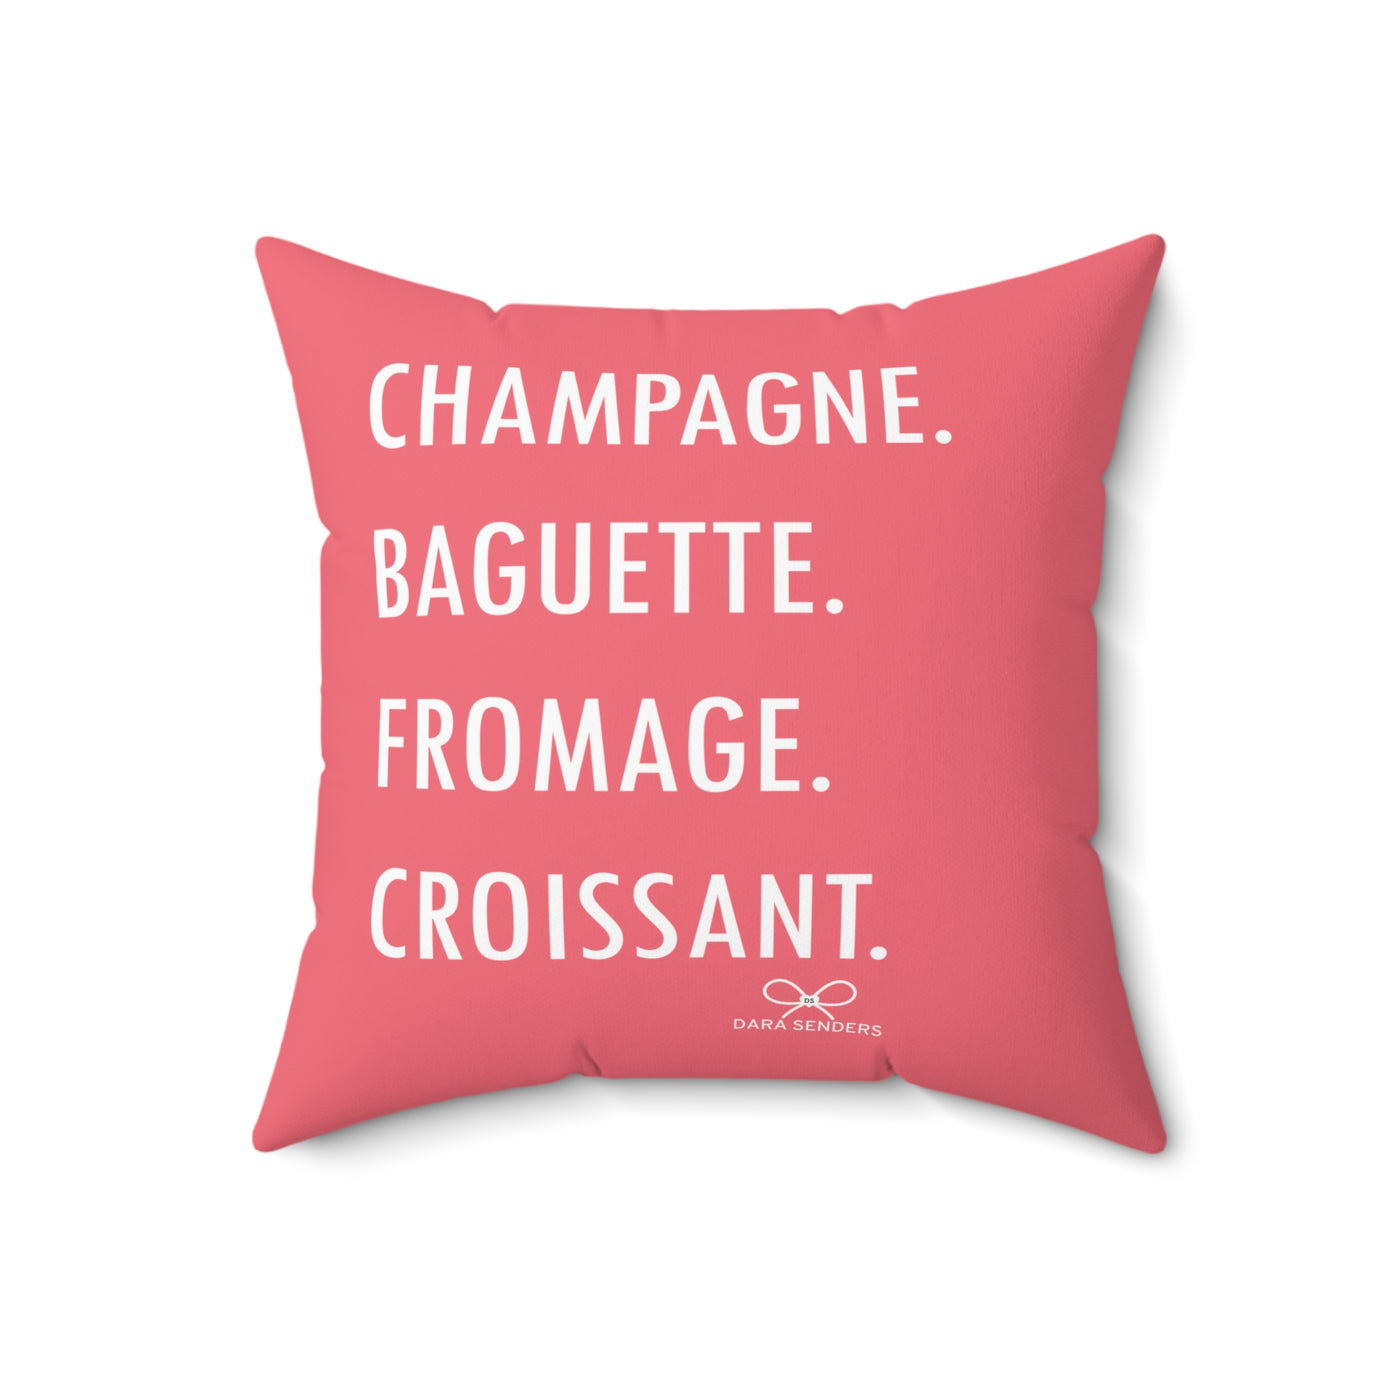 GOURMET LOVE PILLOW Faux Suede (Champagne, Baguette, Fromage, Croissant) - PInk - NEWS 12 EXCLUSIVE